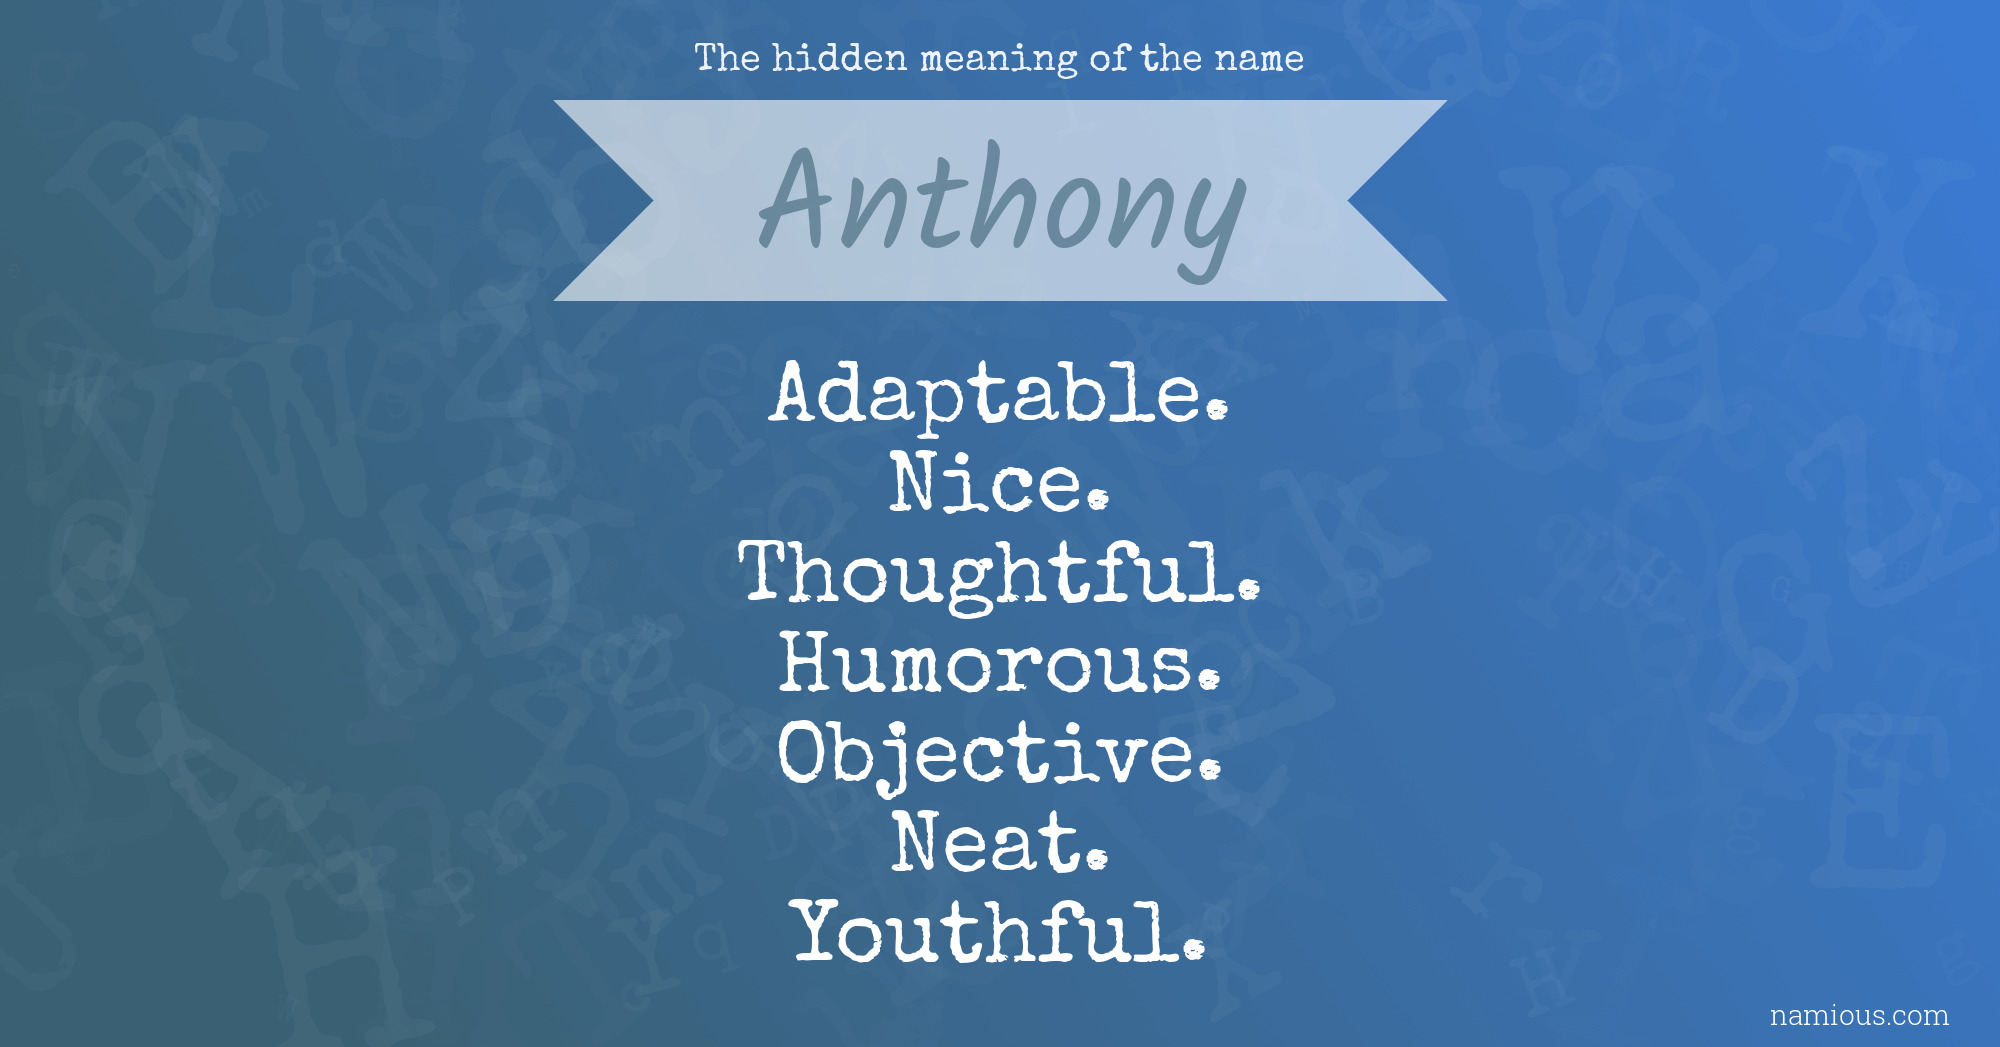 The hidden meaning of the name Anthony